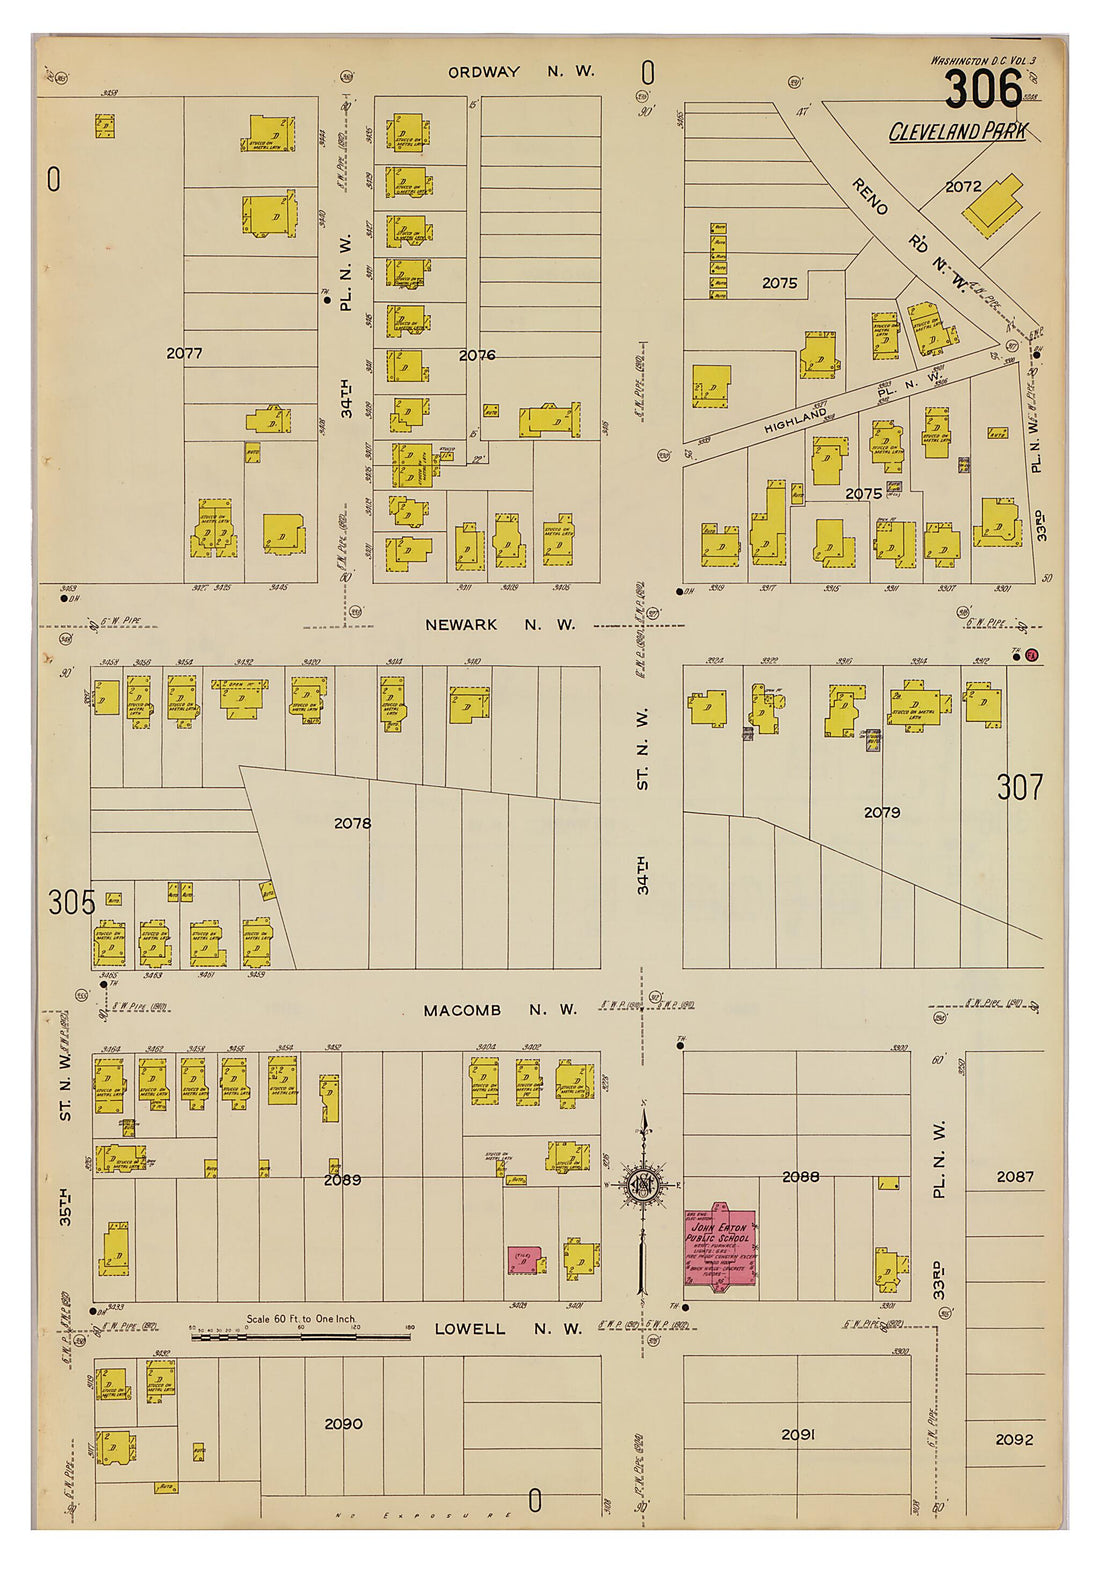 This old map of Takoma Park, Washington D.C. was created by Sanborn Map Company in 1916